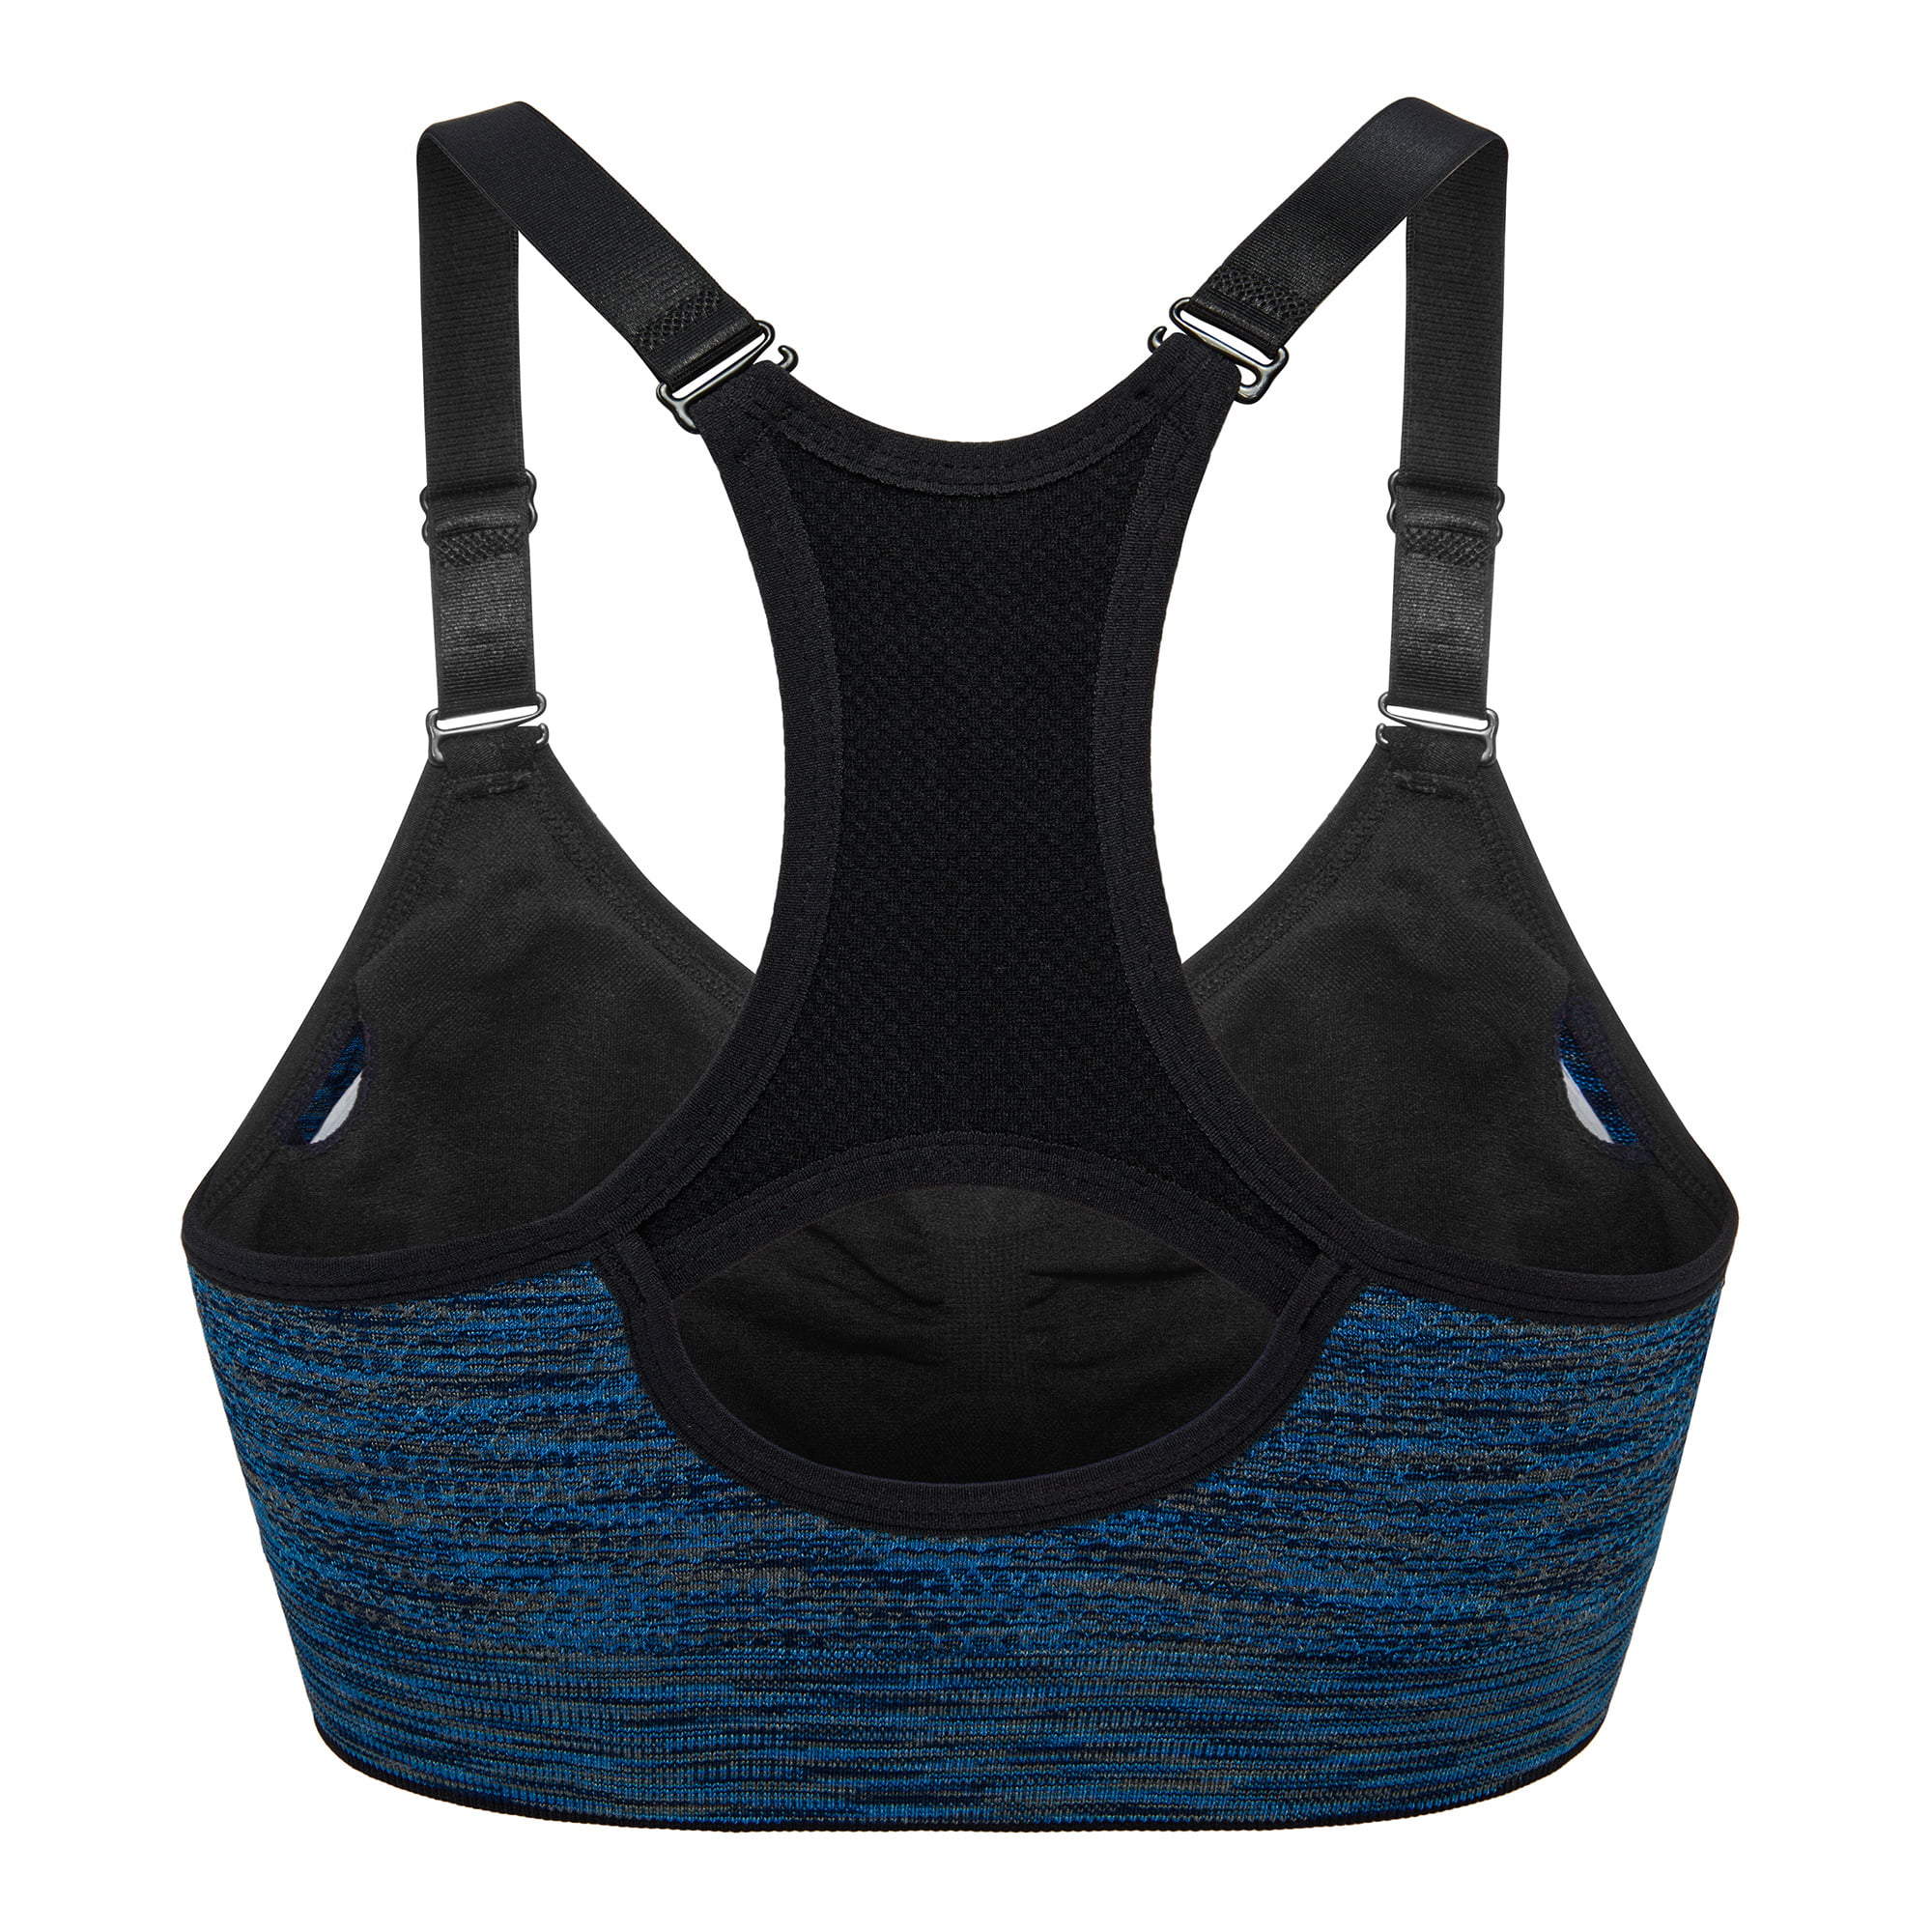 Sexy Sports Bras For Women- Padded Seamless High Impact Support Yoga Sports  Bras For Gym Workout Fitness Running, Breathable Tank Tops,6 Colors And 5  Sizes 